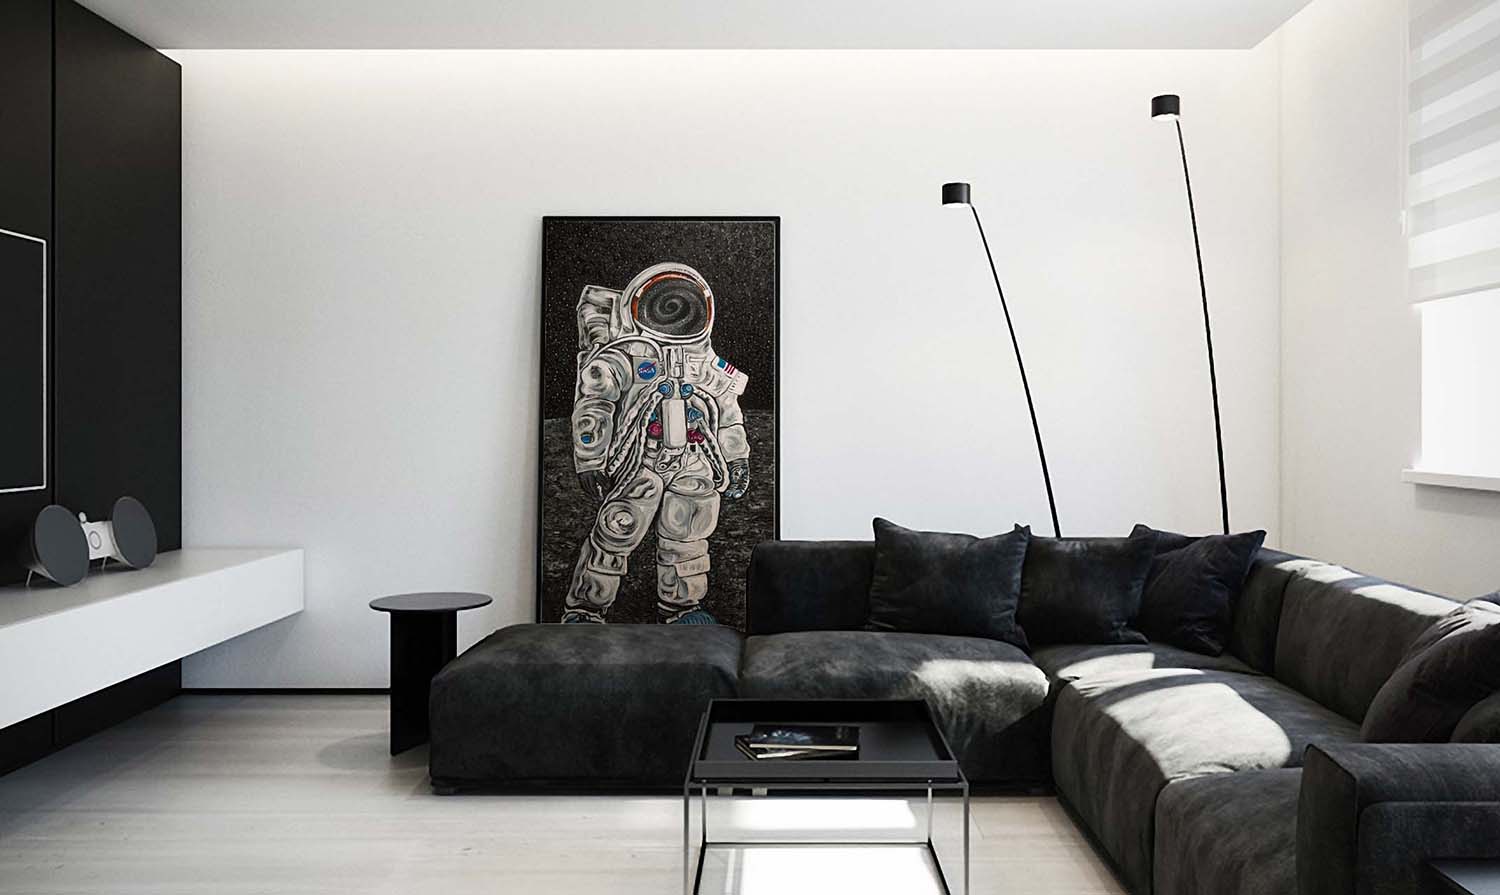 Astronaut standing on the moon observing a black hole framed print behind black leather couch